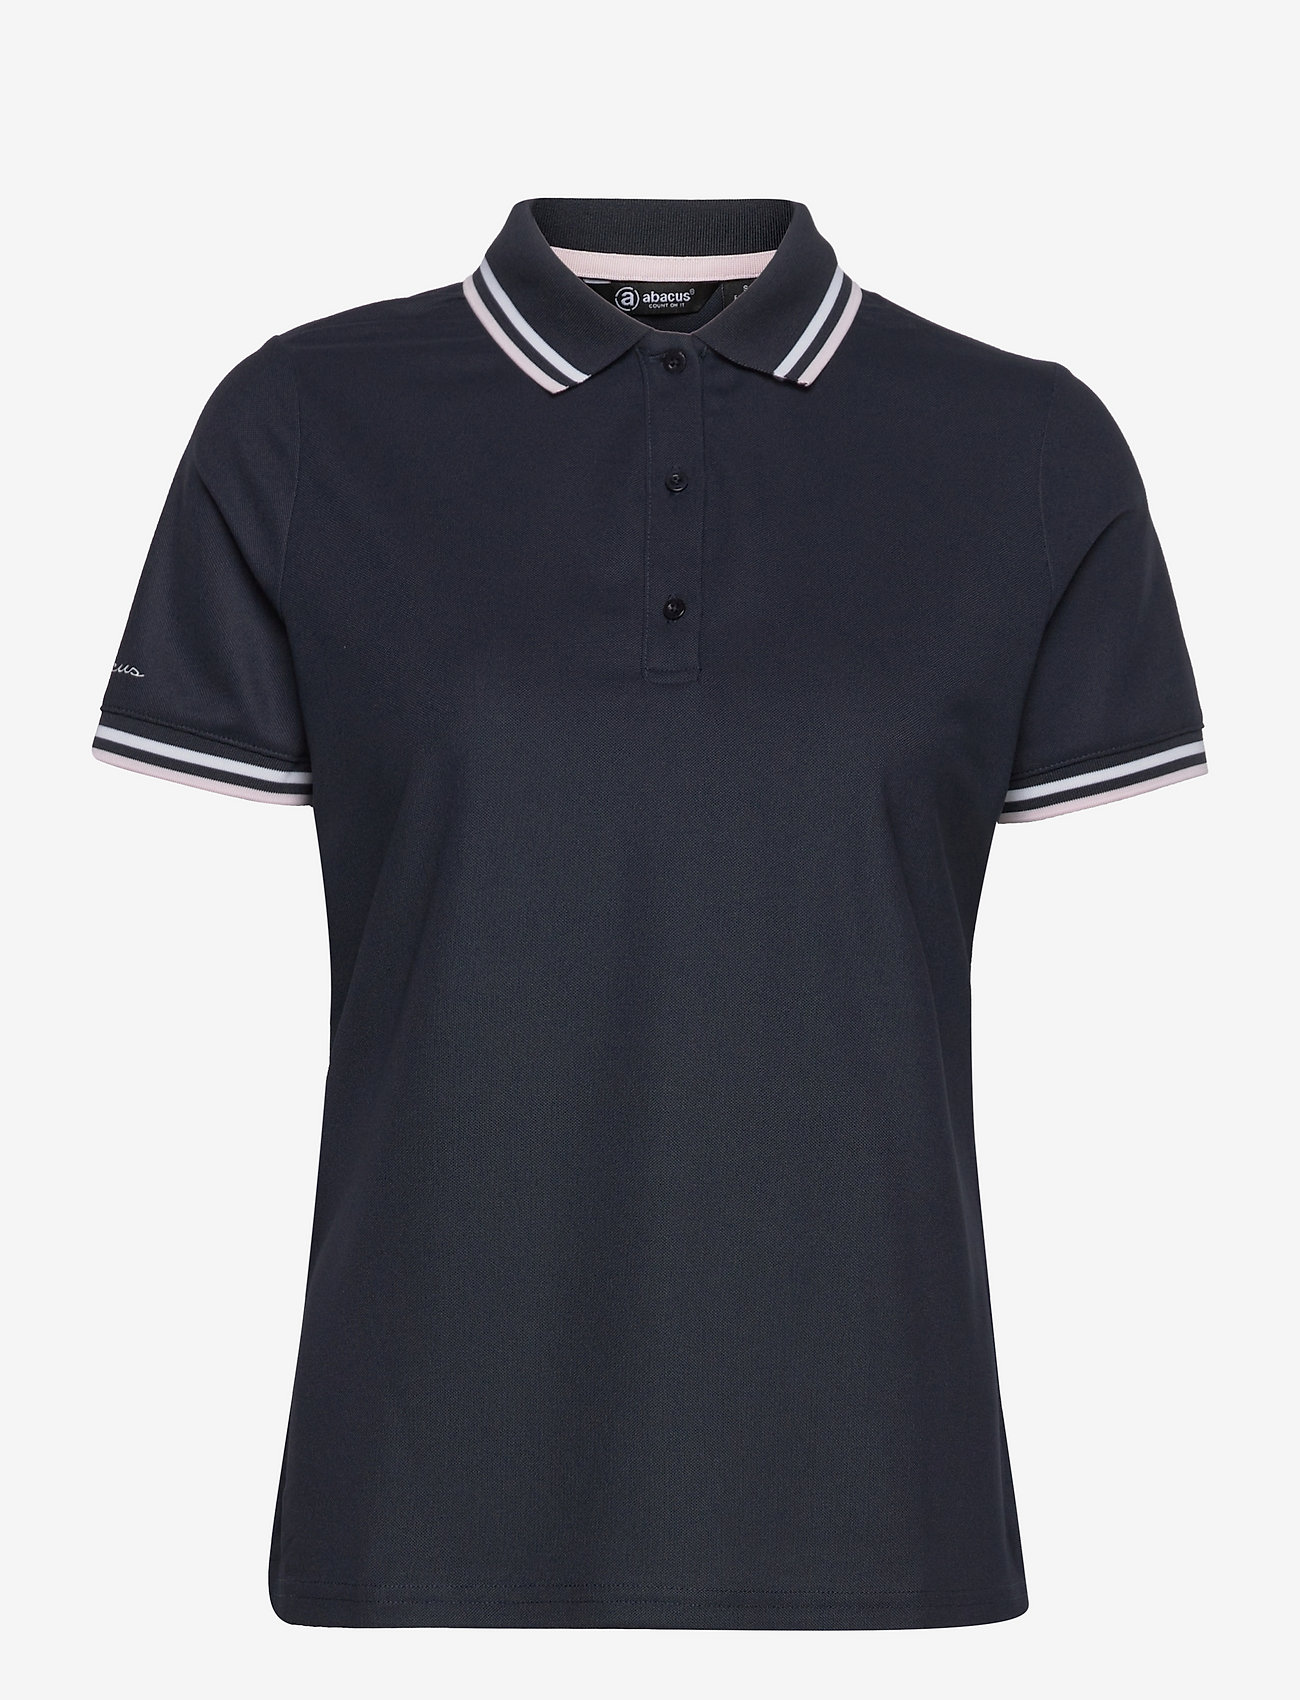 Abacus - Lds Pines polo - poloshirts - navy - 0